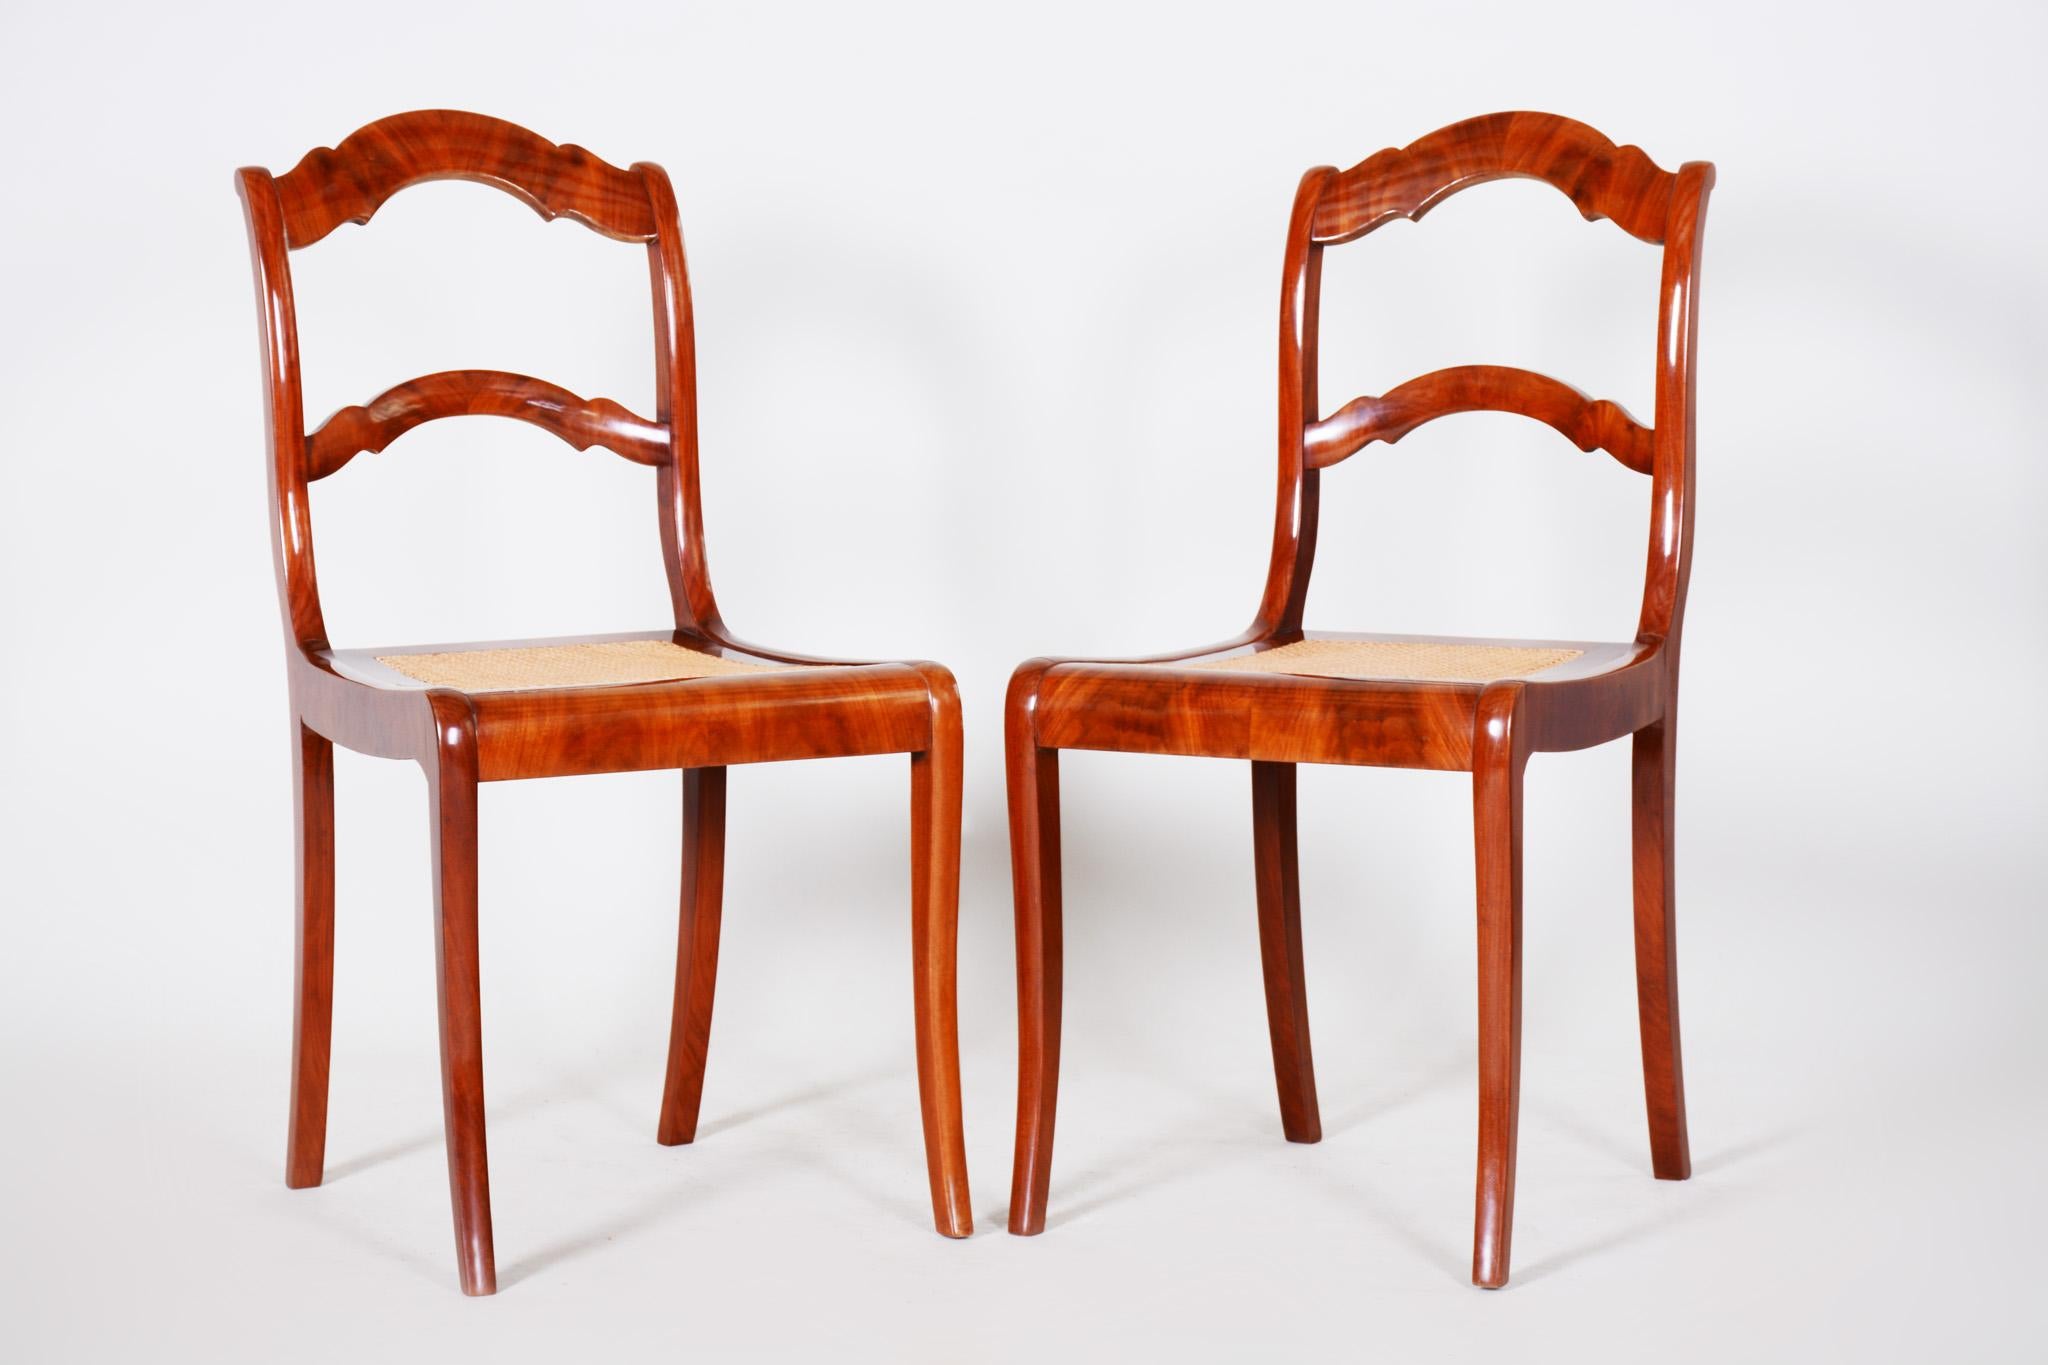 Set of Biedermeier chairs, two pieces.
Completely restored, new wickerwork pedig included.
Source: Germany
Period: 1830-1839
Shellac-polish.

We guarantee safe a the cheapest air transport from Europe to the whole world within 7 days.
The price is